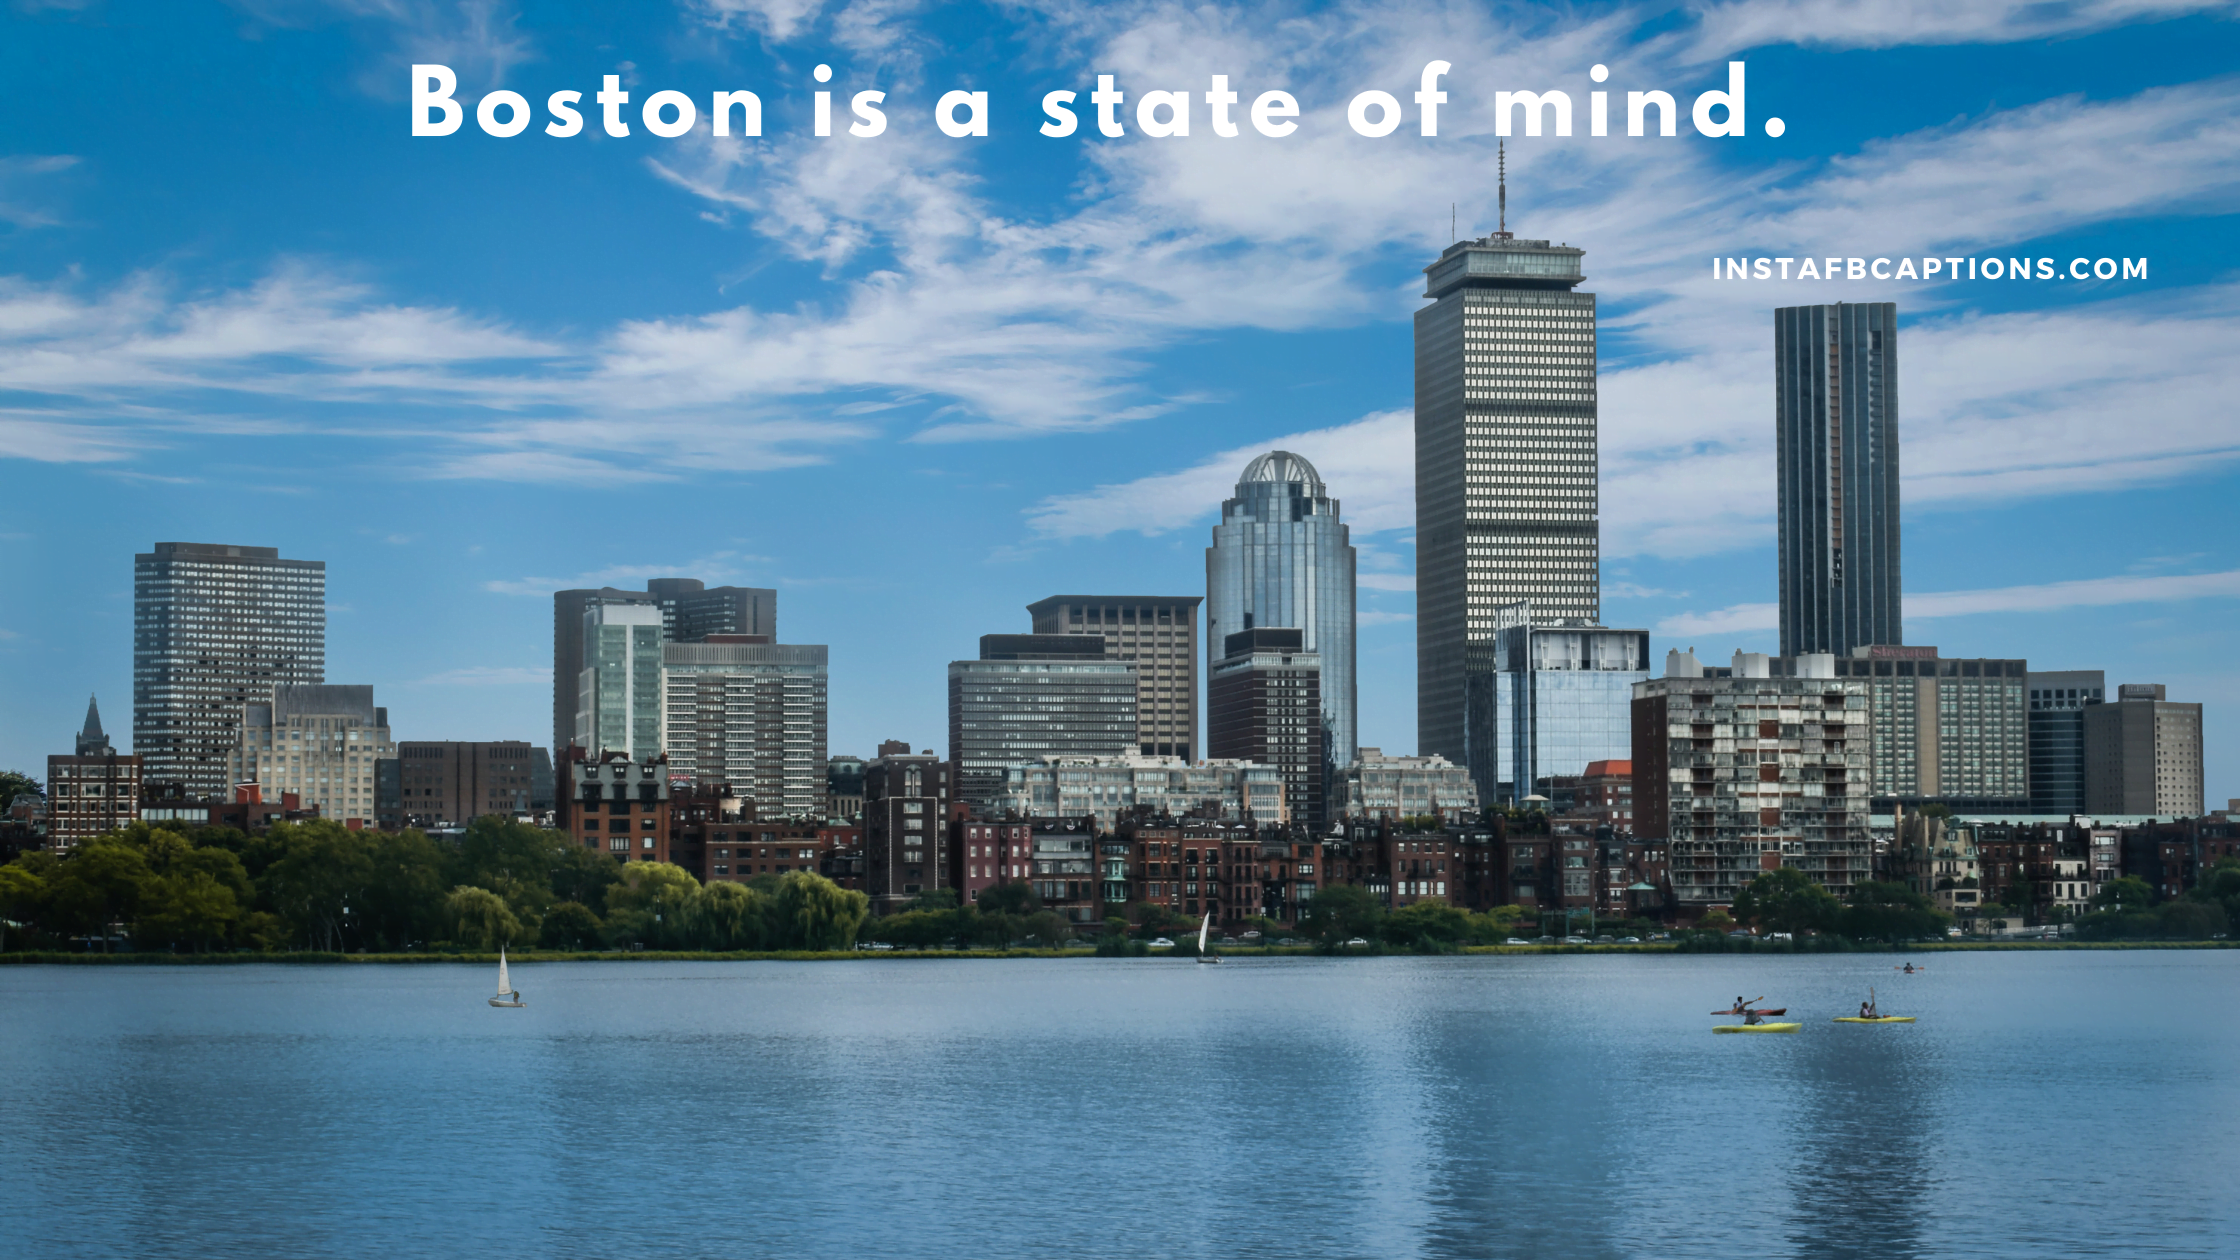 Short Boston Quotes About Massachusetts  - Short Boston Quotes About Massachusetts - 167 Boston Instagram Captions Quotes in 2022